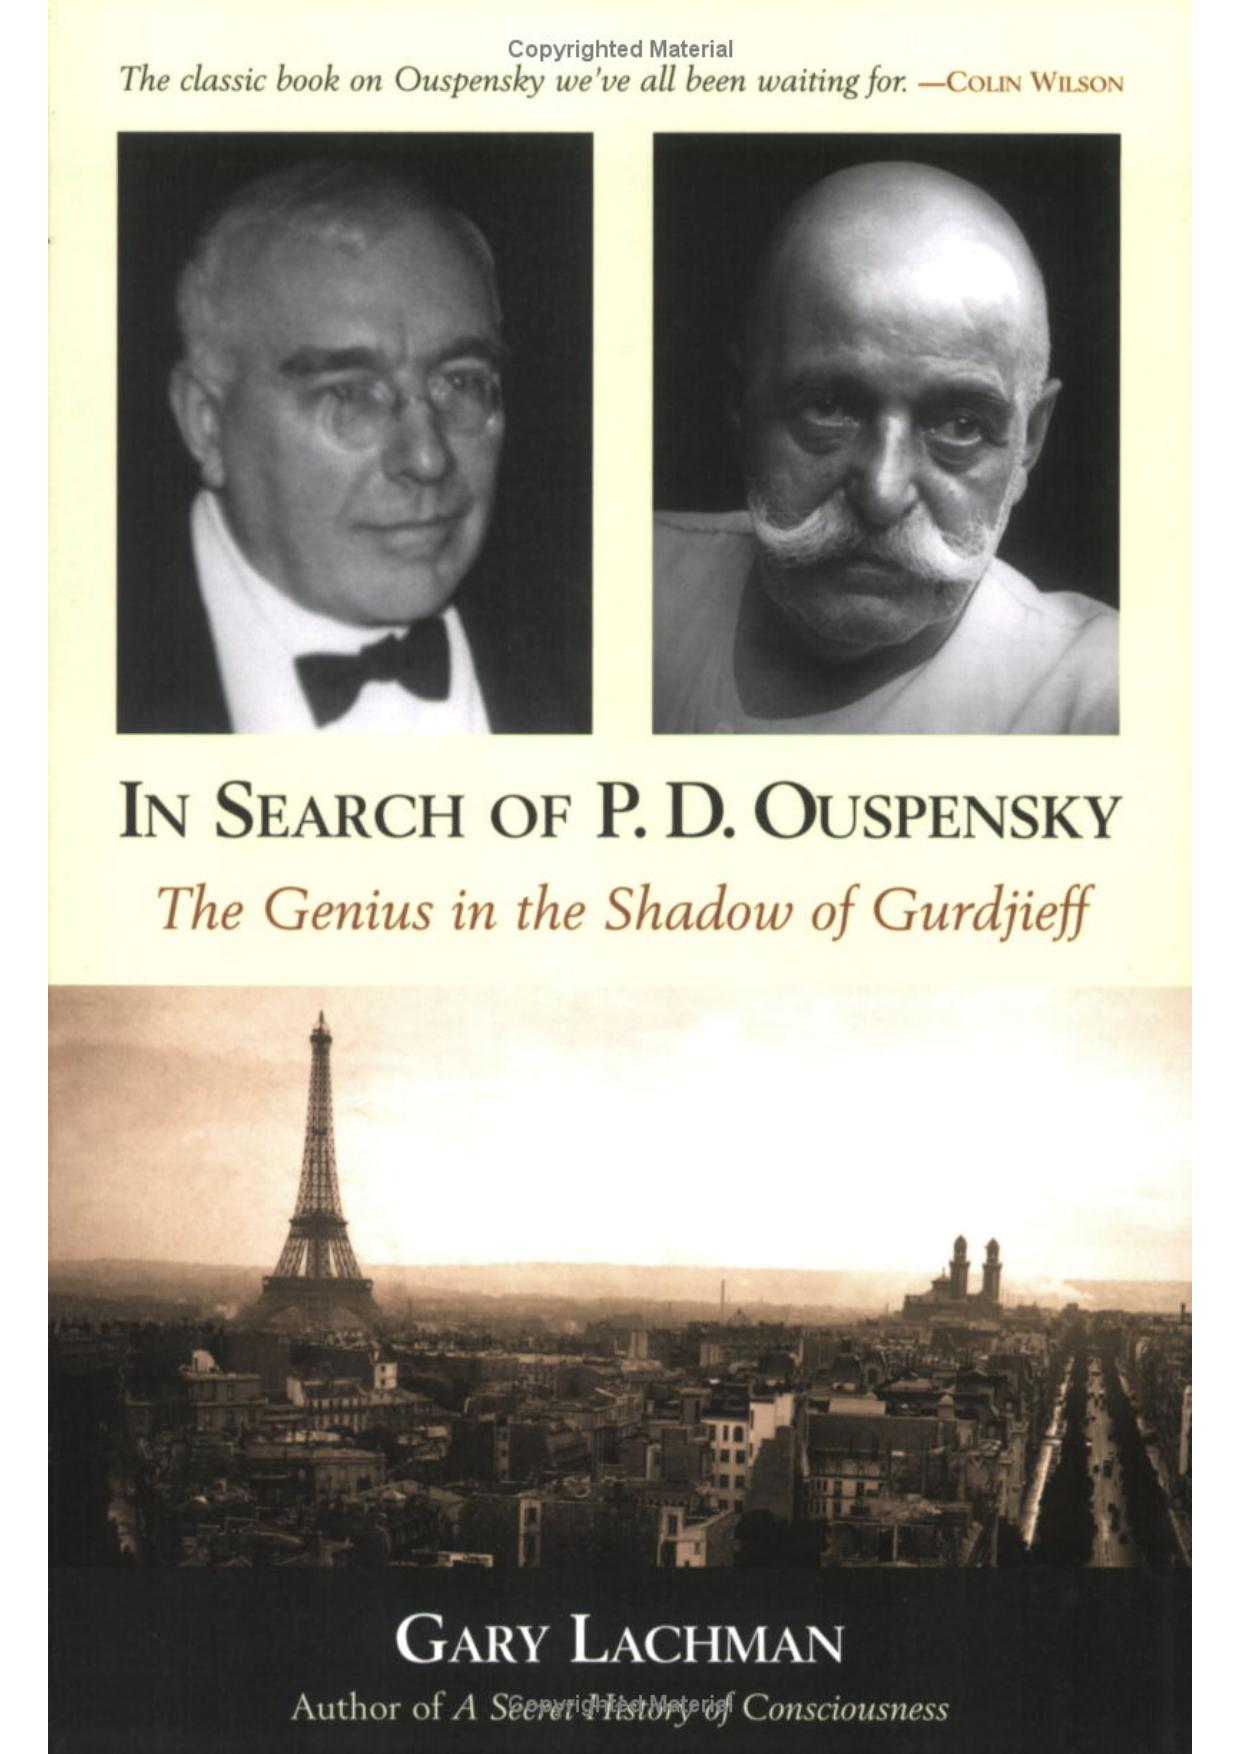 In Search of P. D. Ouspensky The Genius in the Shadow of Gurdjieff